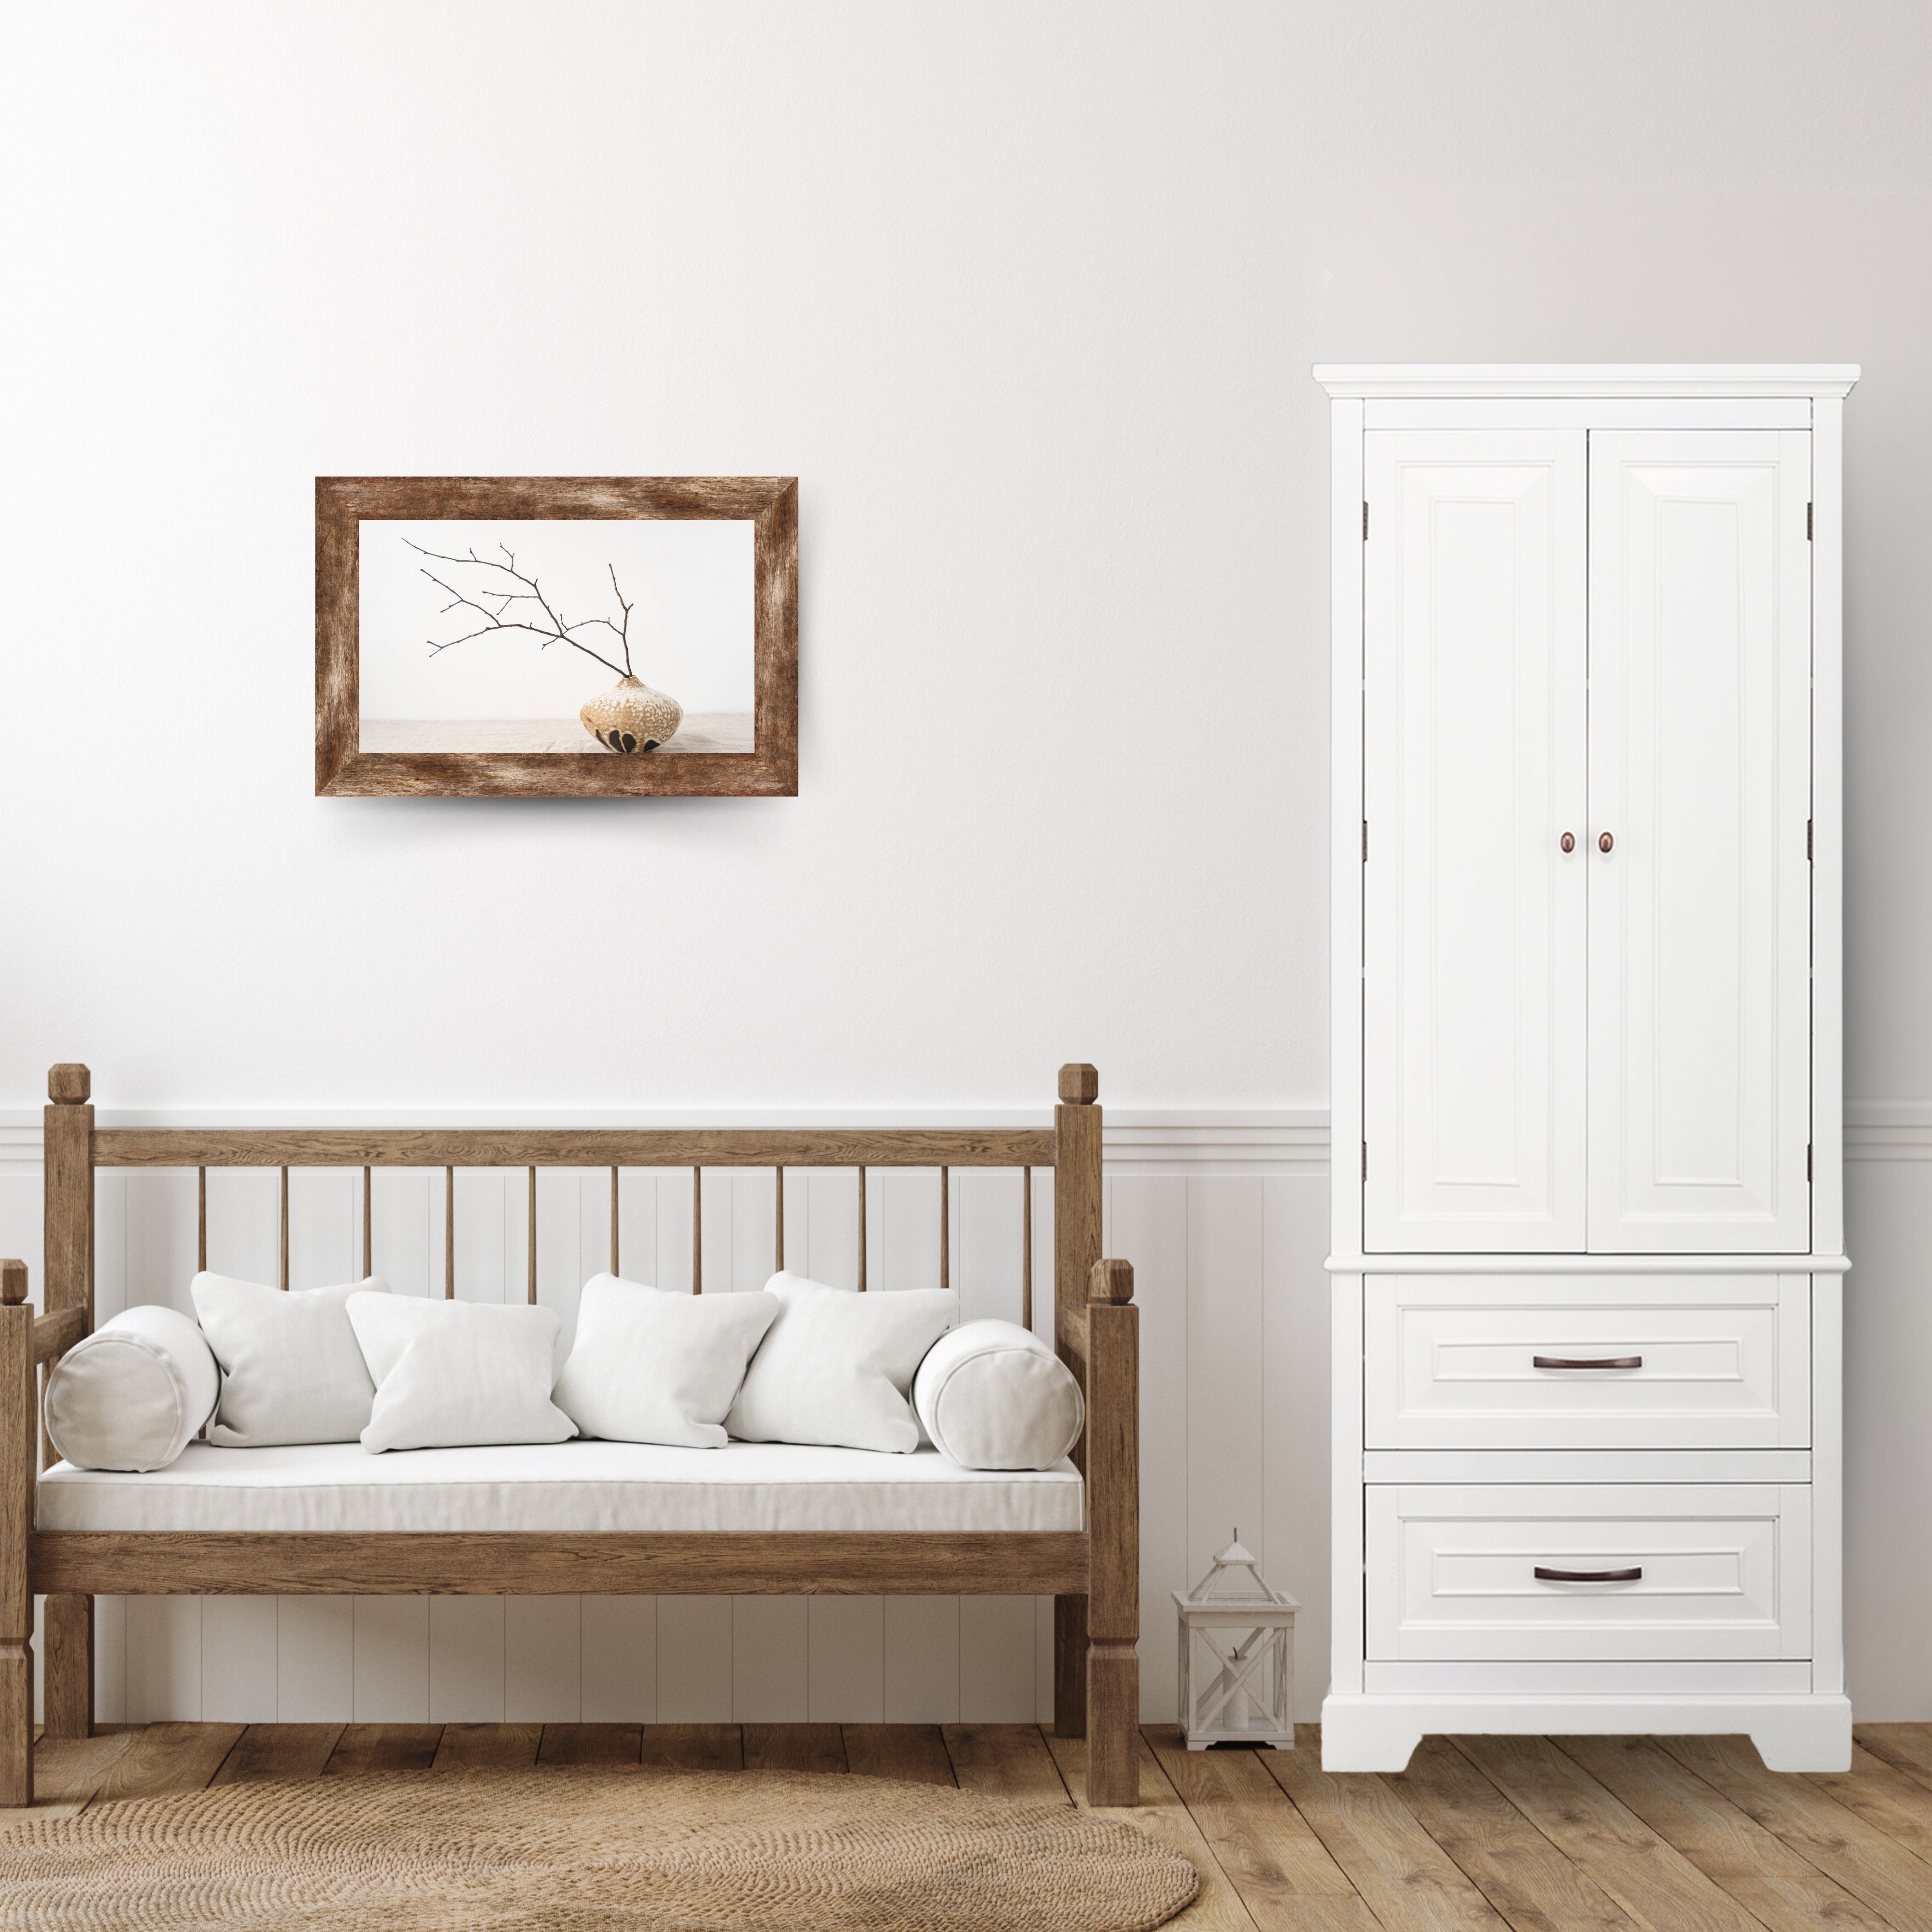 A wooden bench with white cushions against a white wall, next to a white double-door cabinet with two lower drawers.